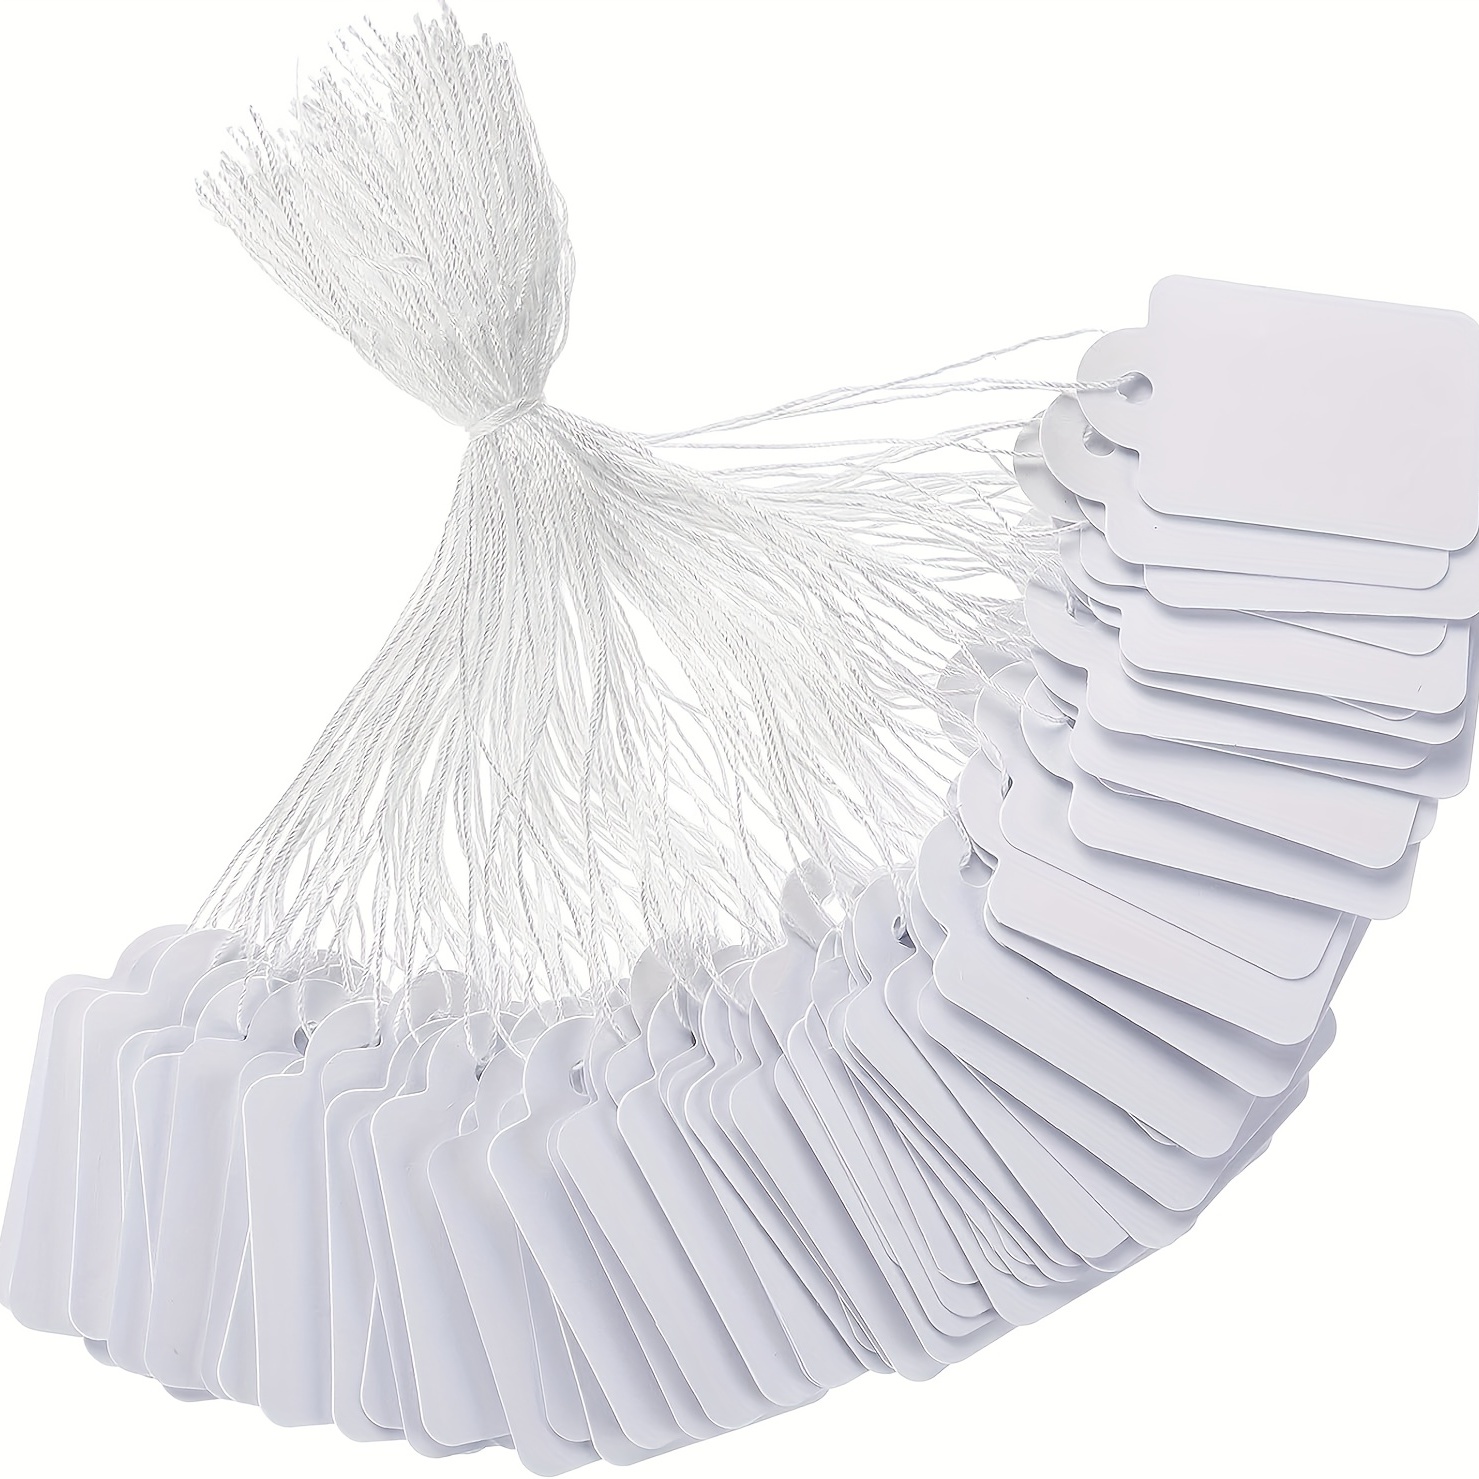 Small White Blank Merchandise Tags With String